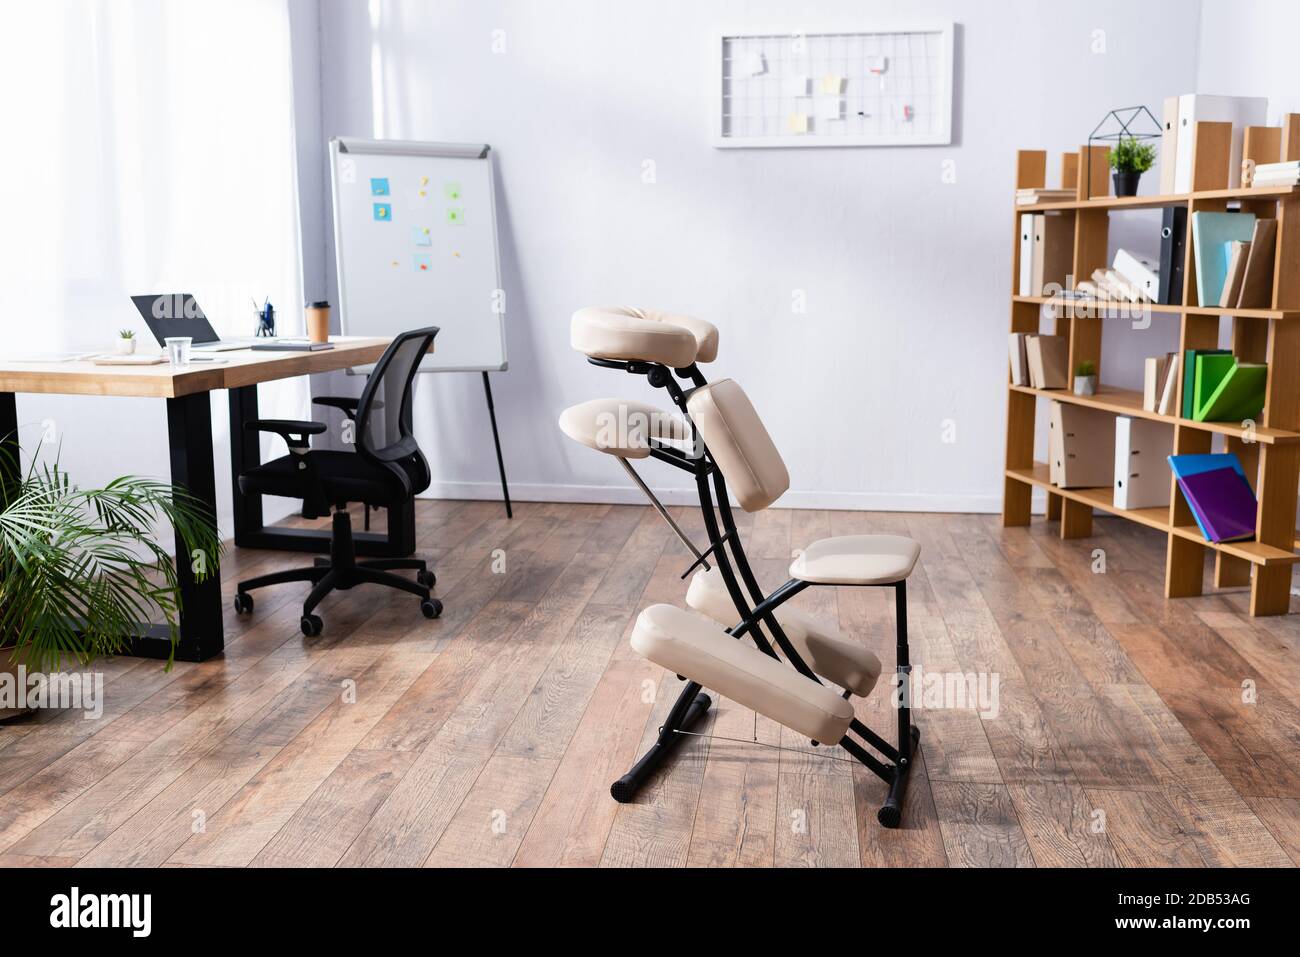 Interior of spacious office with modern design and massage chair Stock Photo